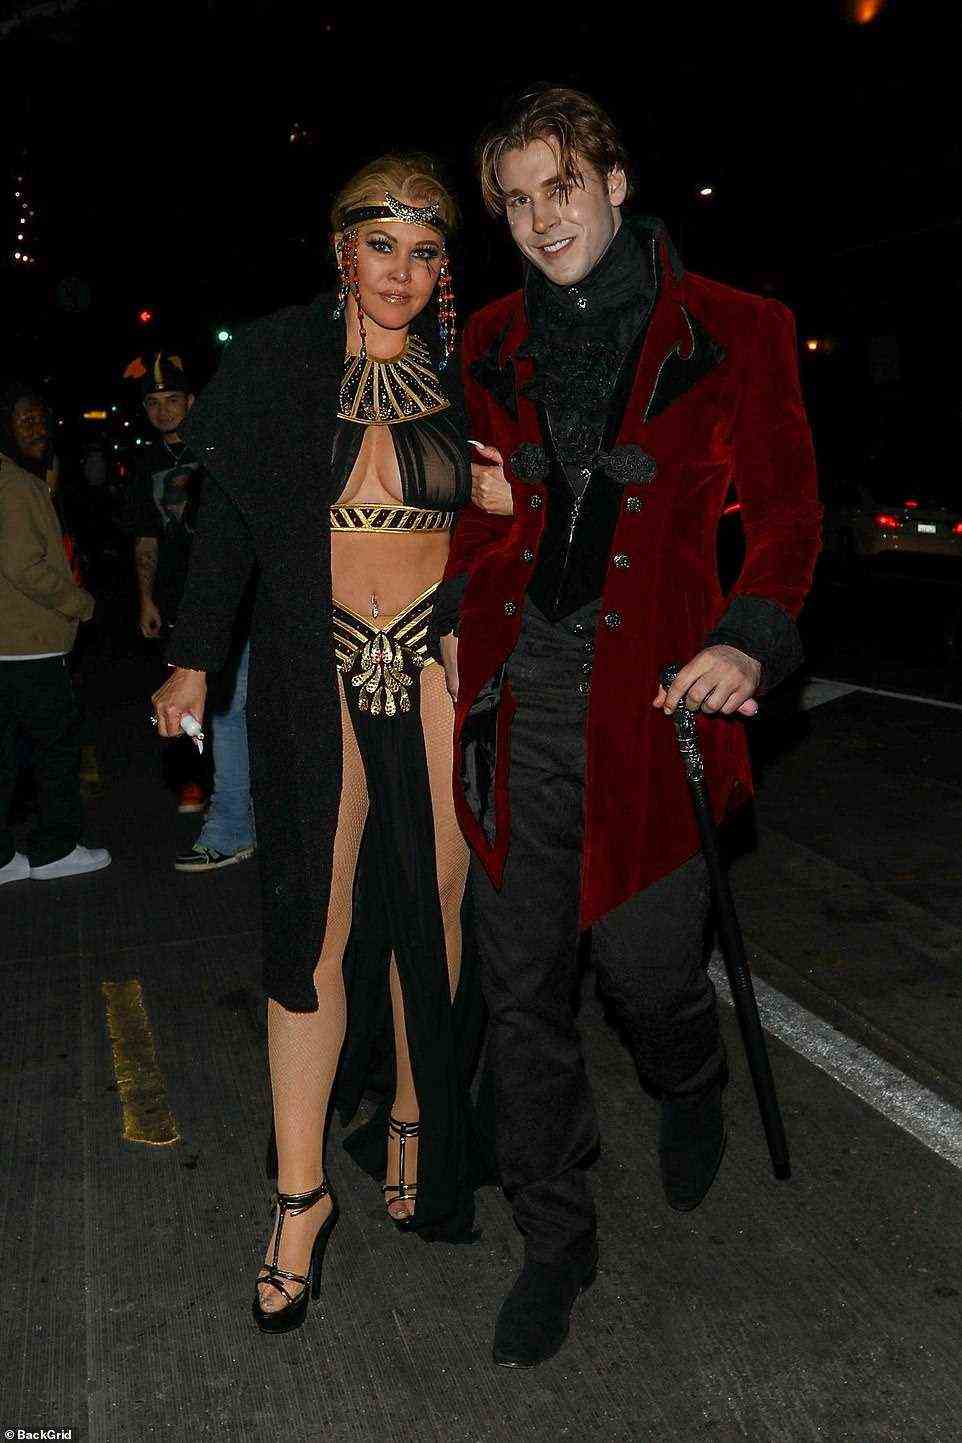 Out and about: The 46-year-old former pageant queen showed off her gym-honed figure in a sexy Egyptian queen costume while Matthew, 29, opted for a vampire disguise for a wild night out on the town following her exes engagement news